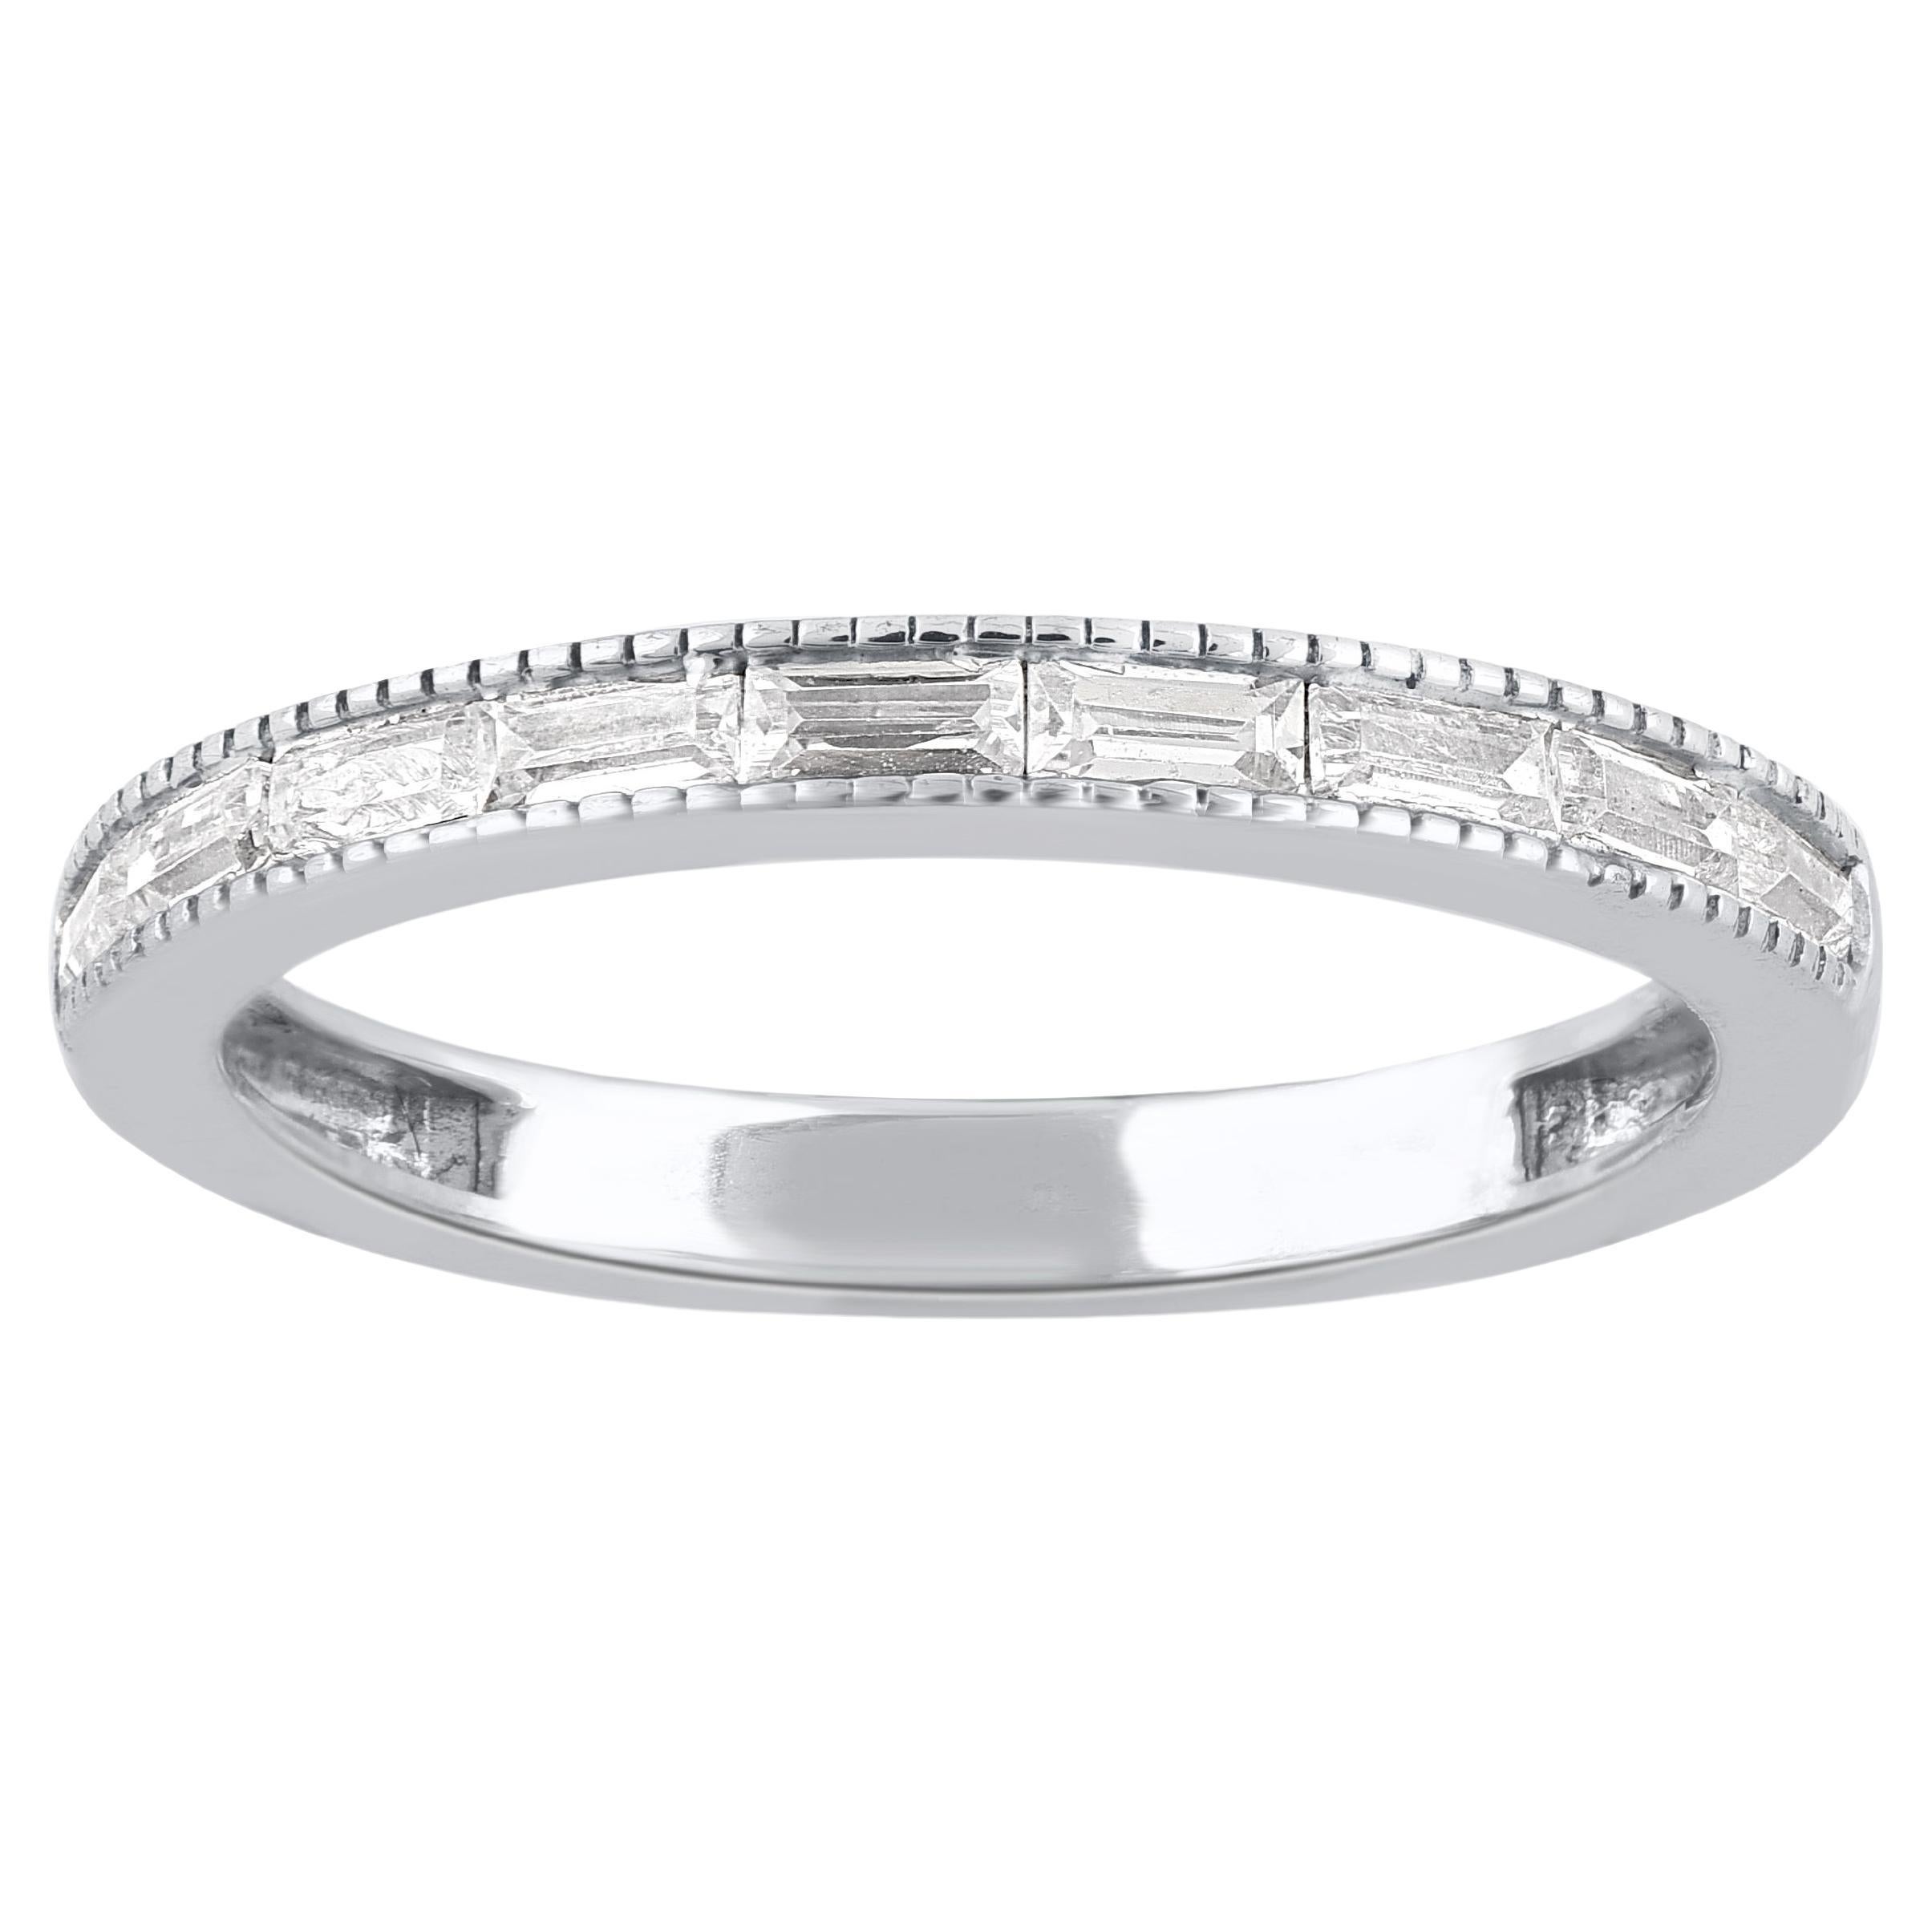 TJD 0.33 Carat Baguette Diamond 14KT White Gold Stackable Wedding Band Ring For Sale